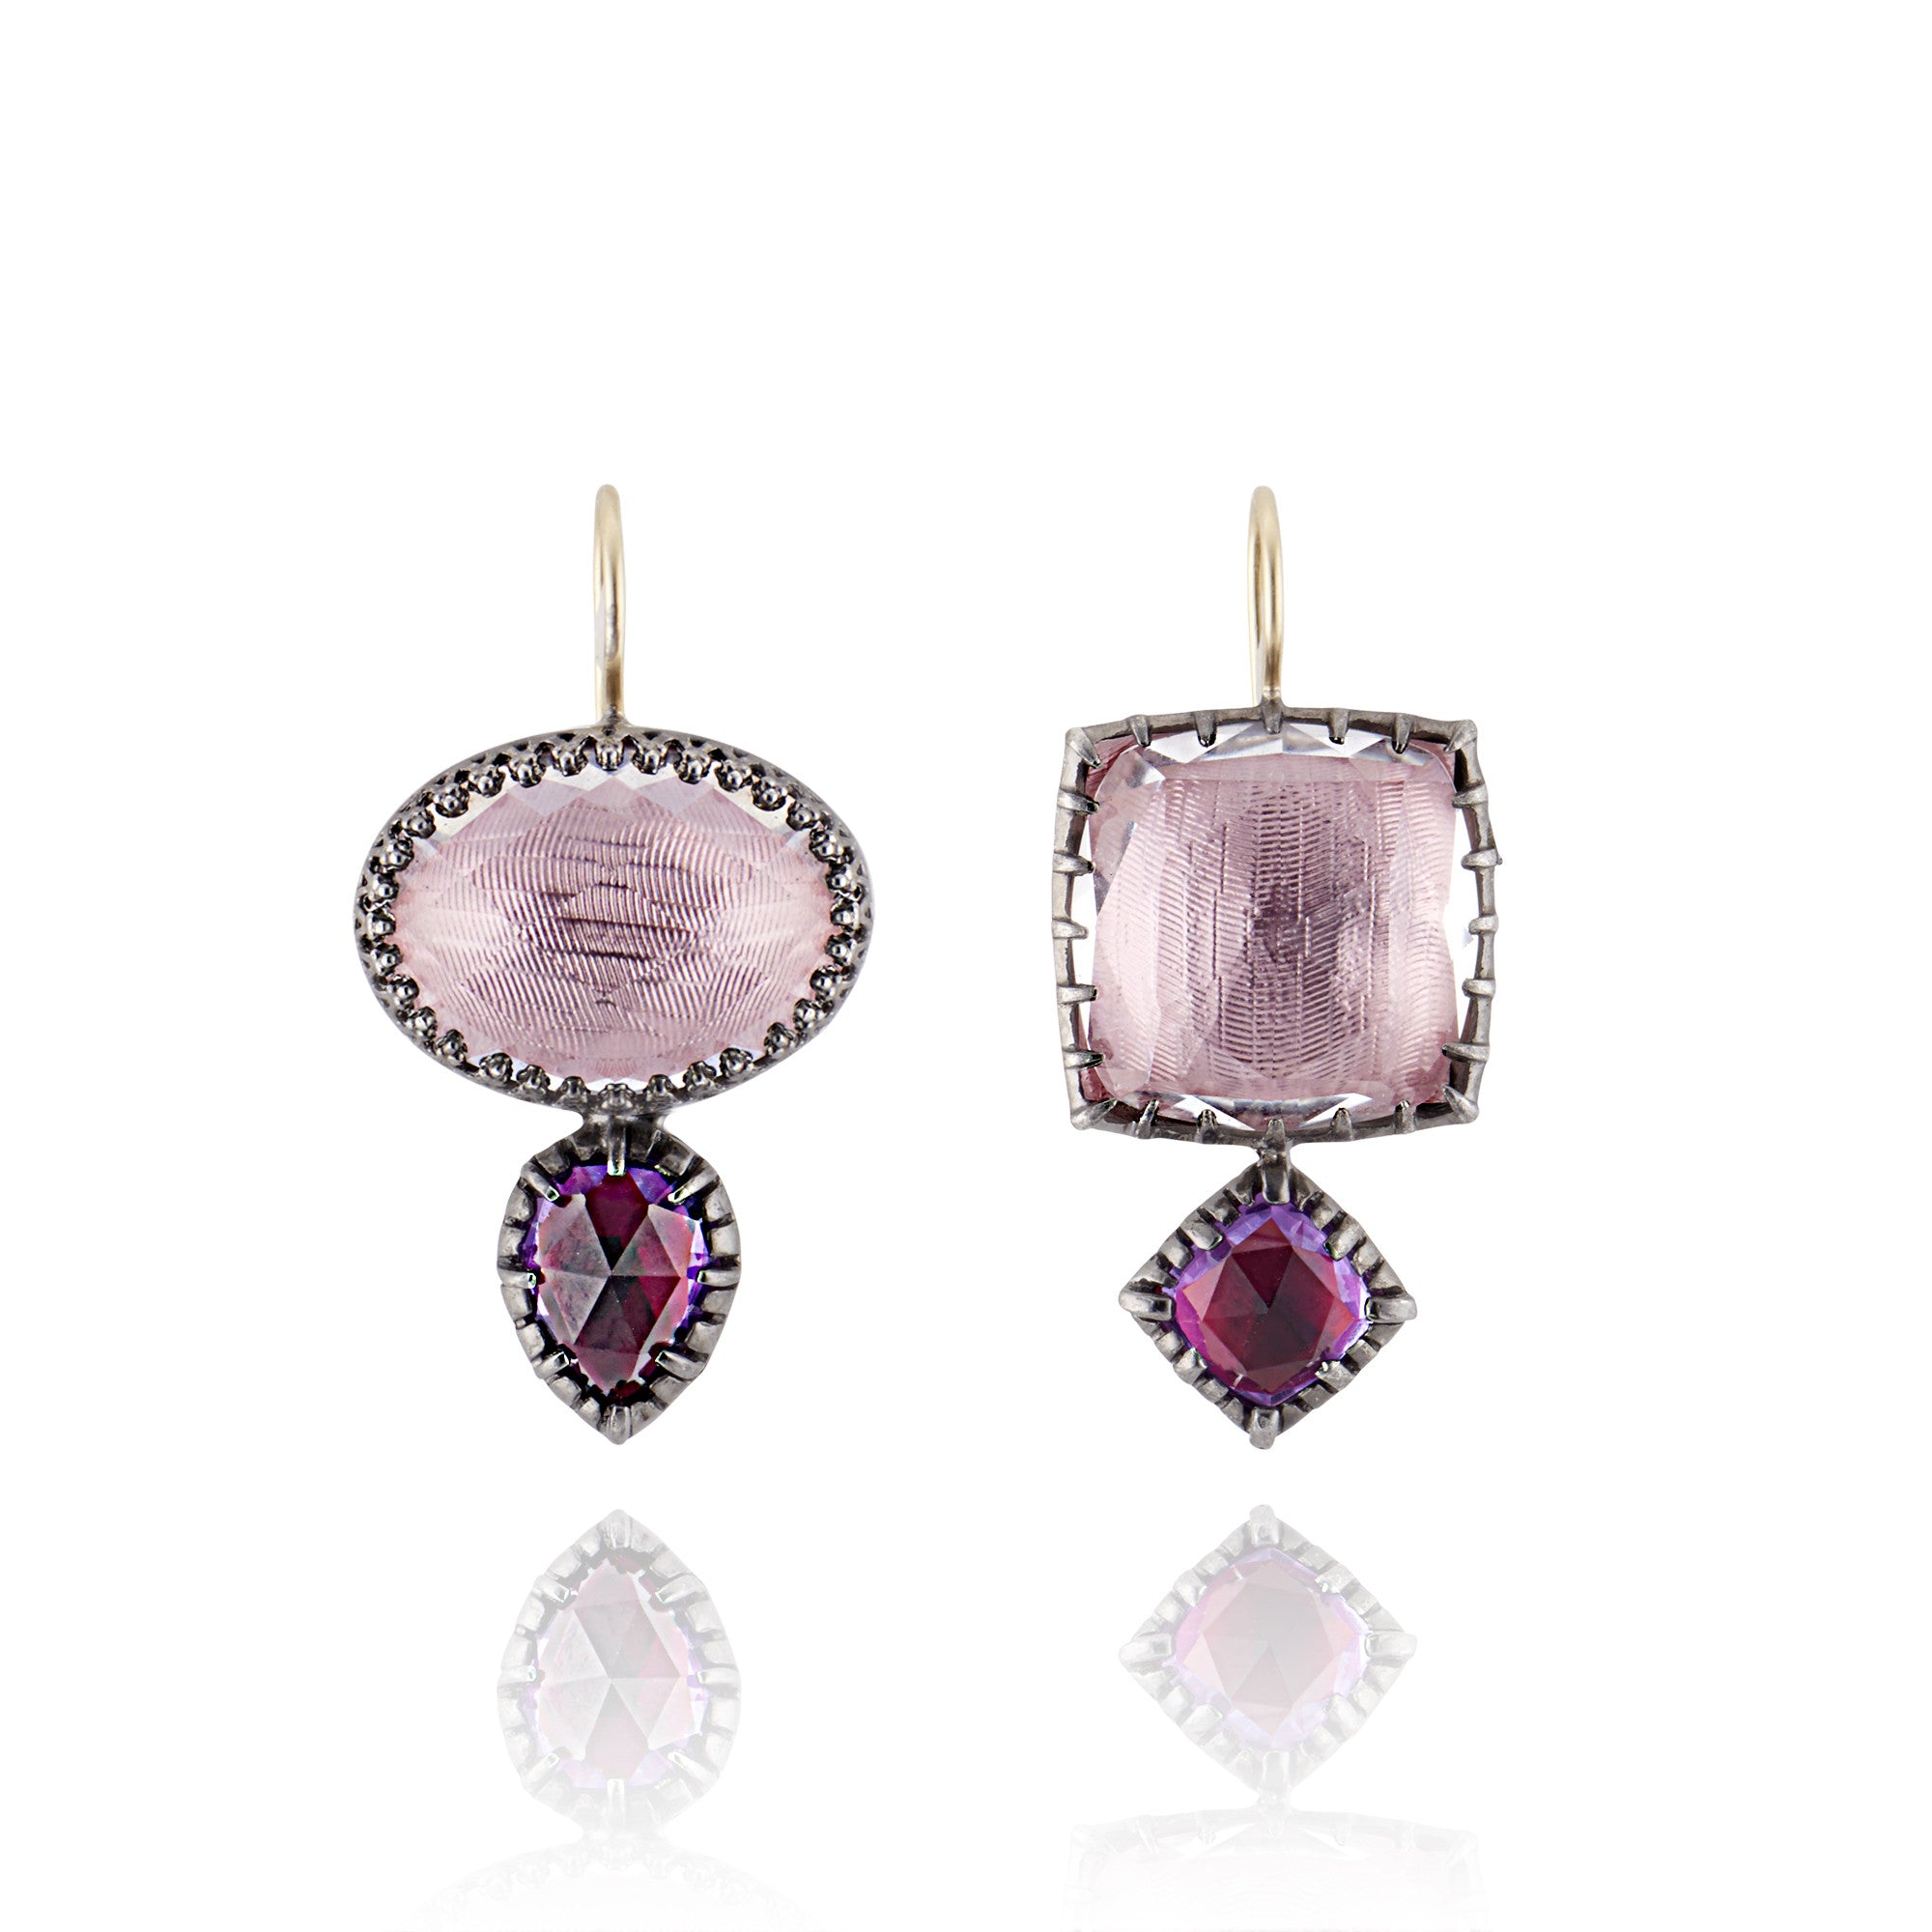 Sadie Mis-Matched Double Drop Earrings on Earwire (Black Rhodium or Rose Gold Wash)